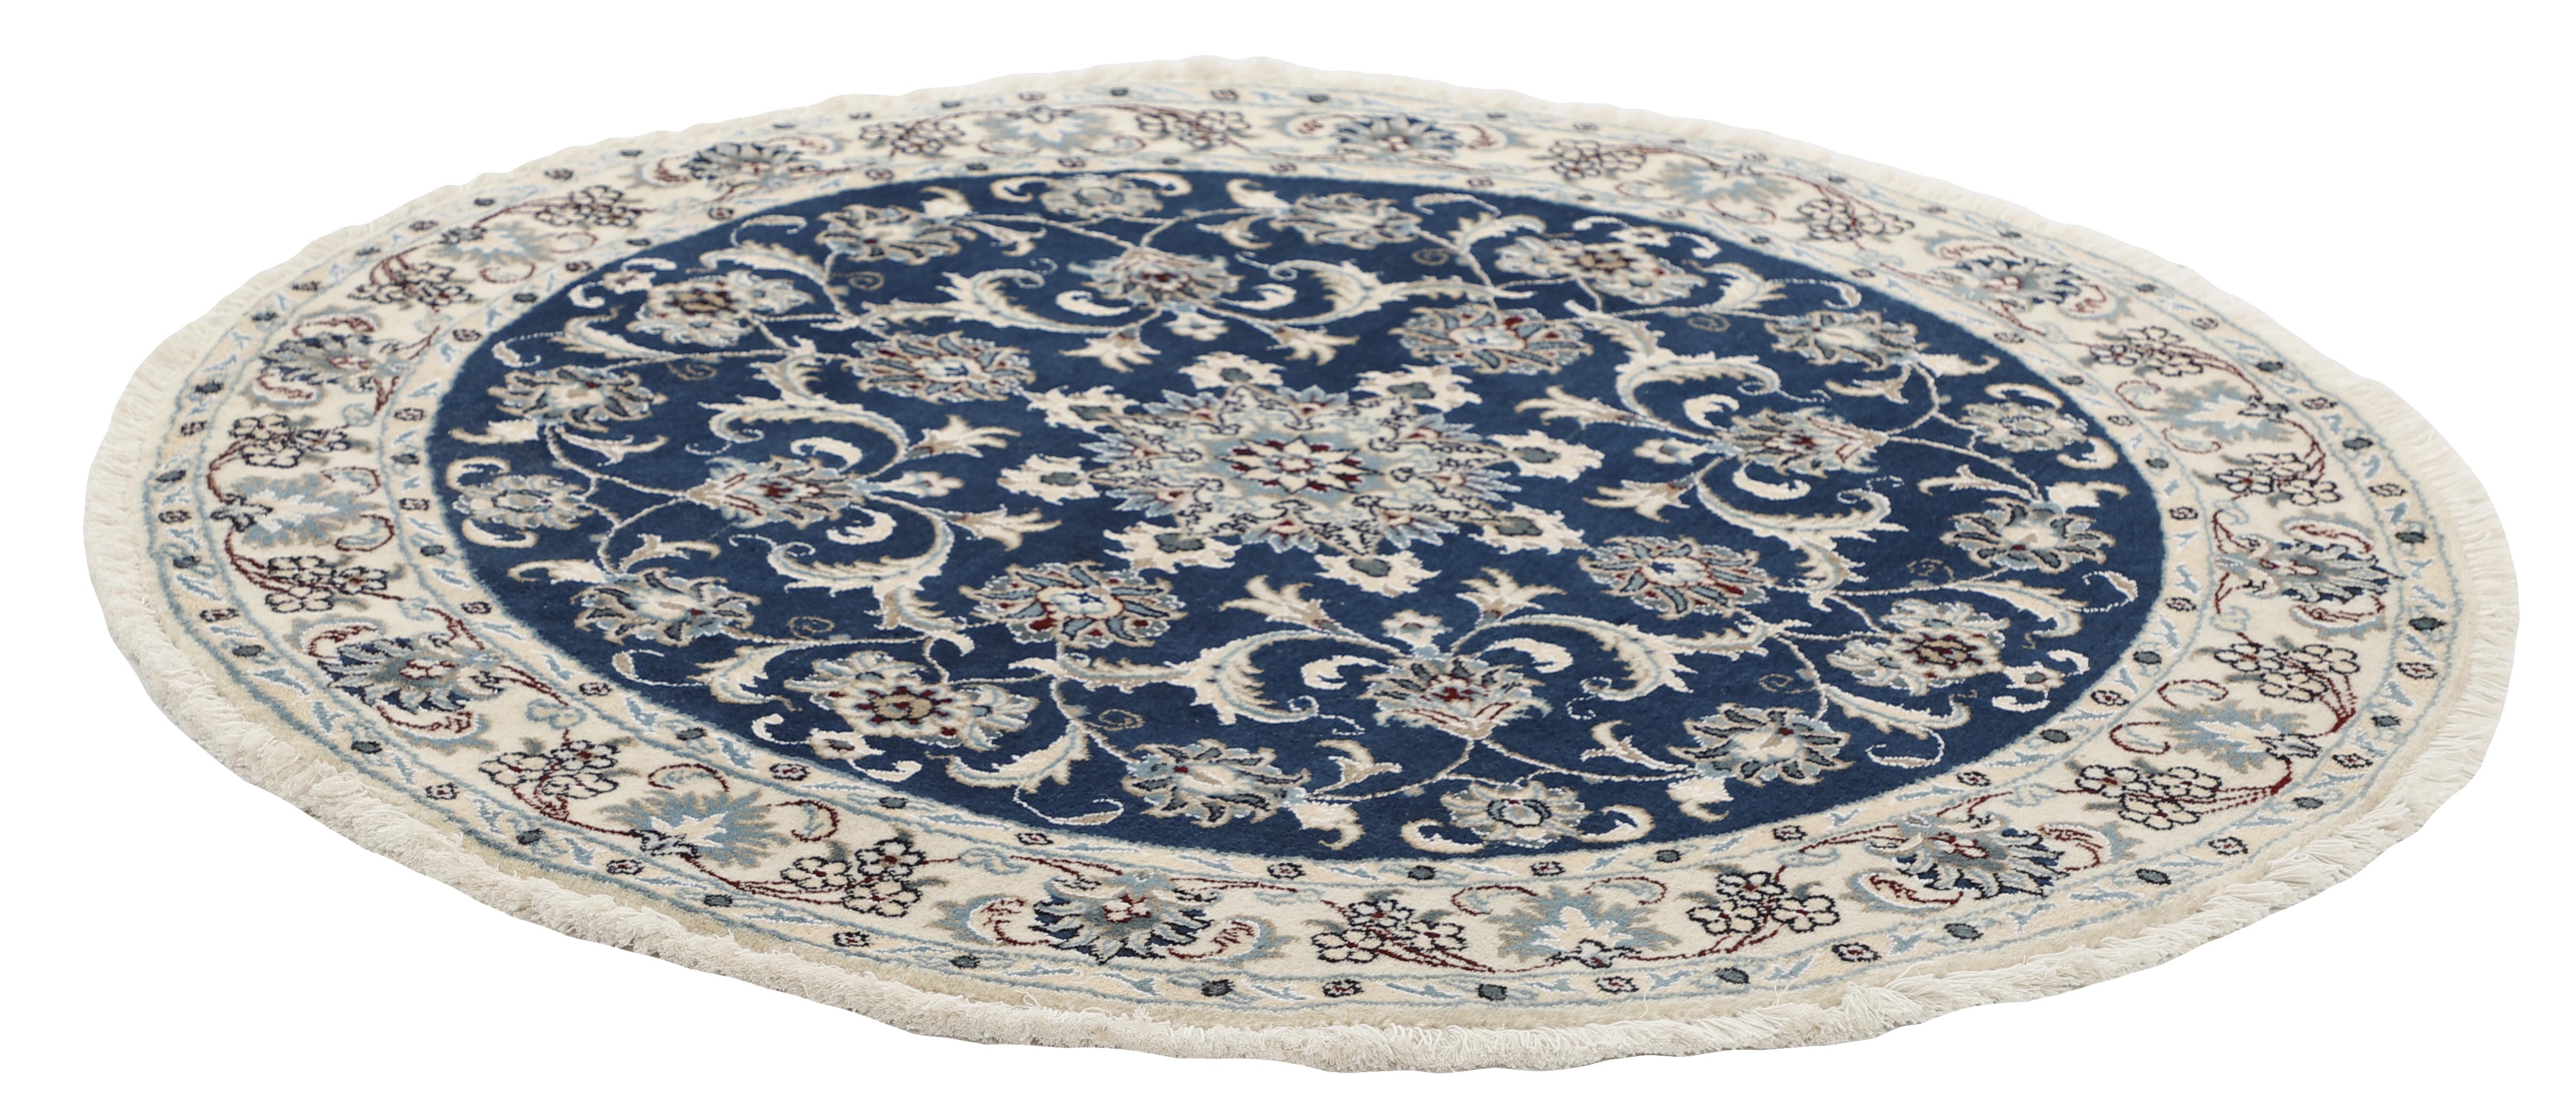 Authentic persian circle rug with a traditional floral design in cream and blue